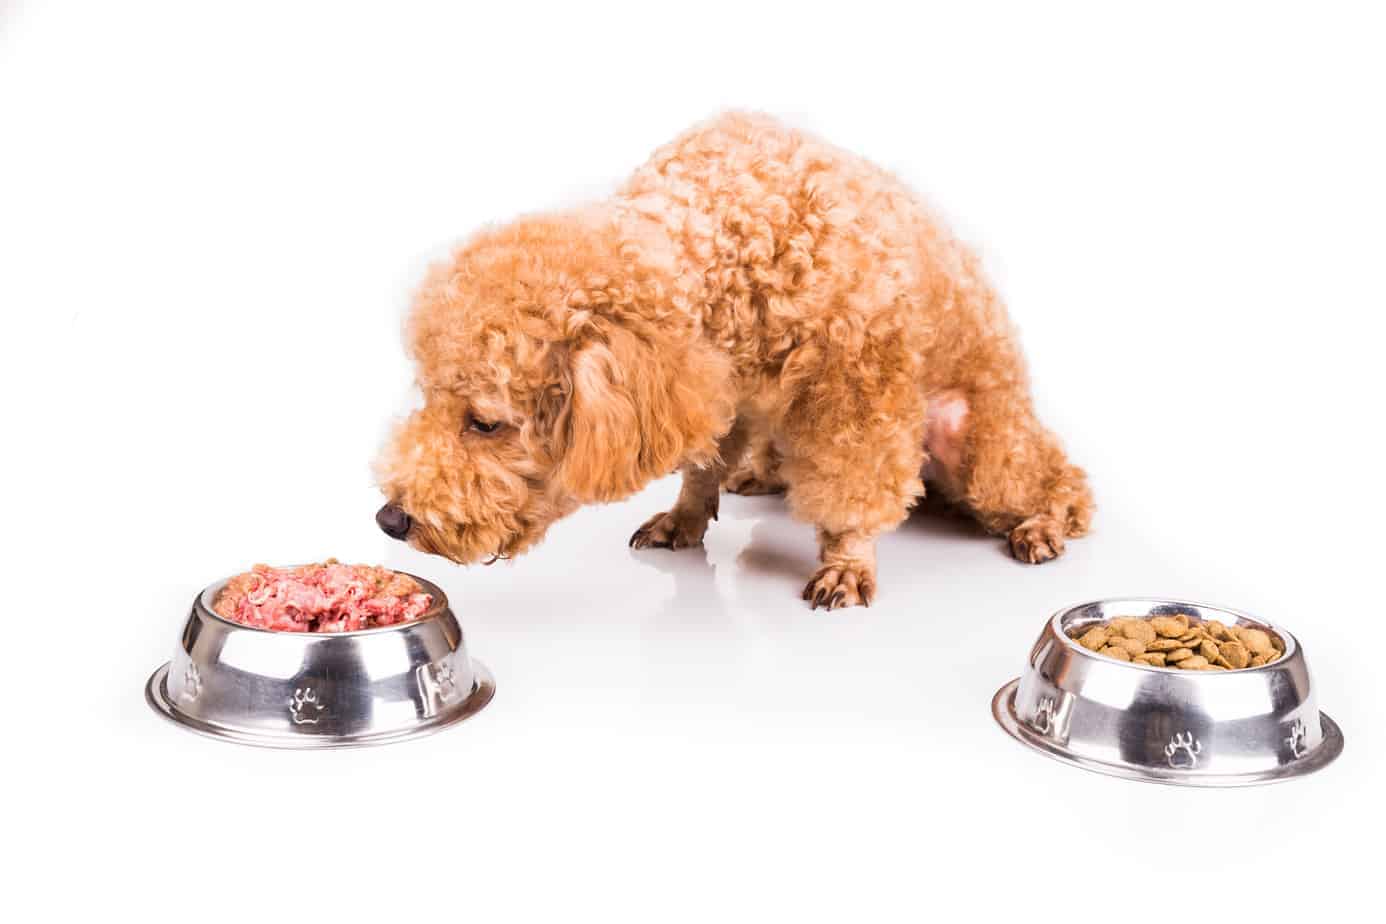 A Labradoodle sniffing some food